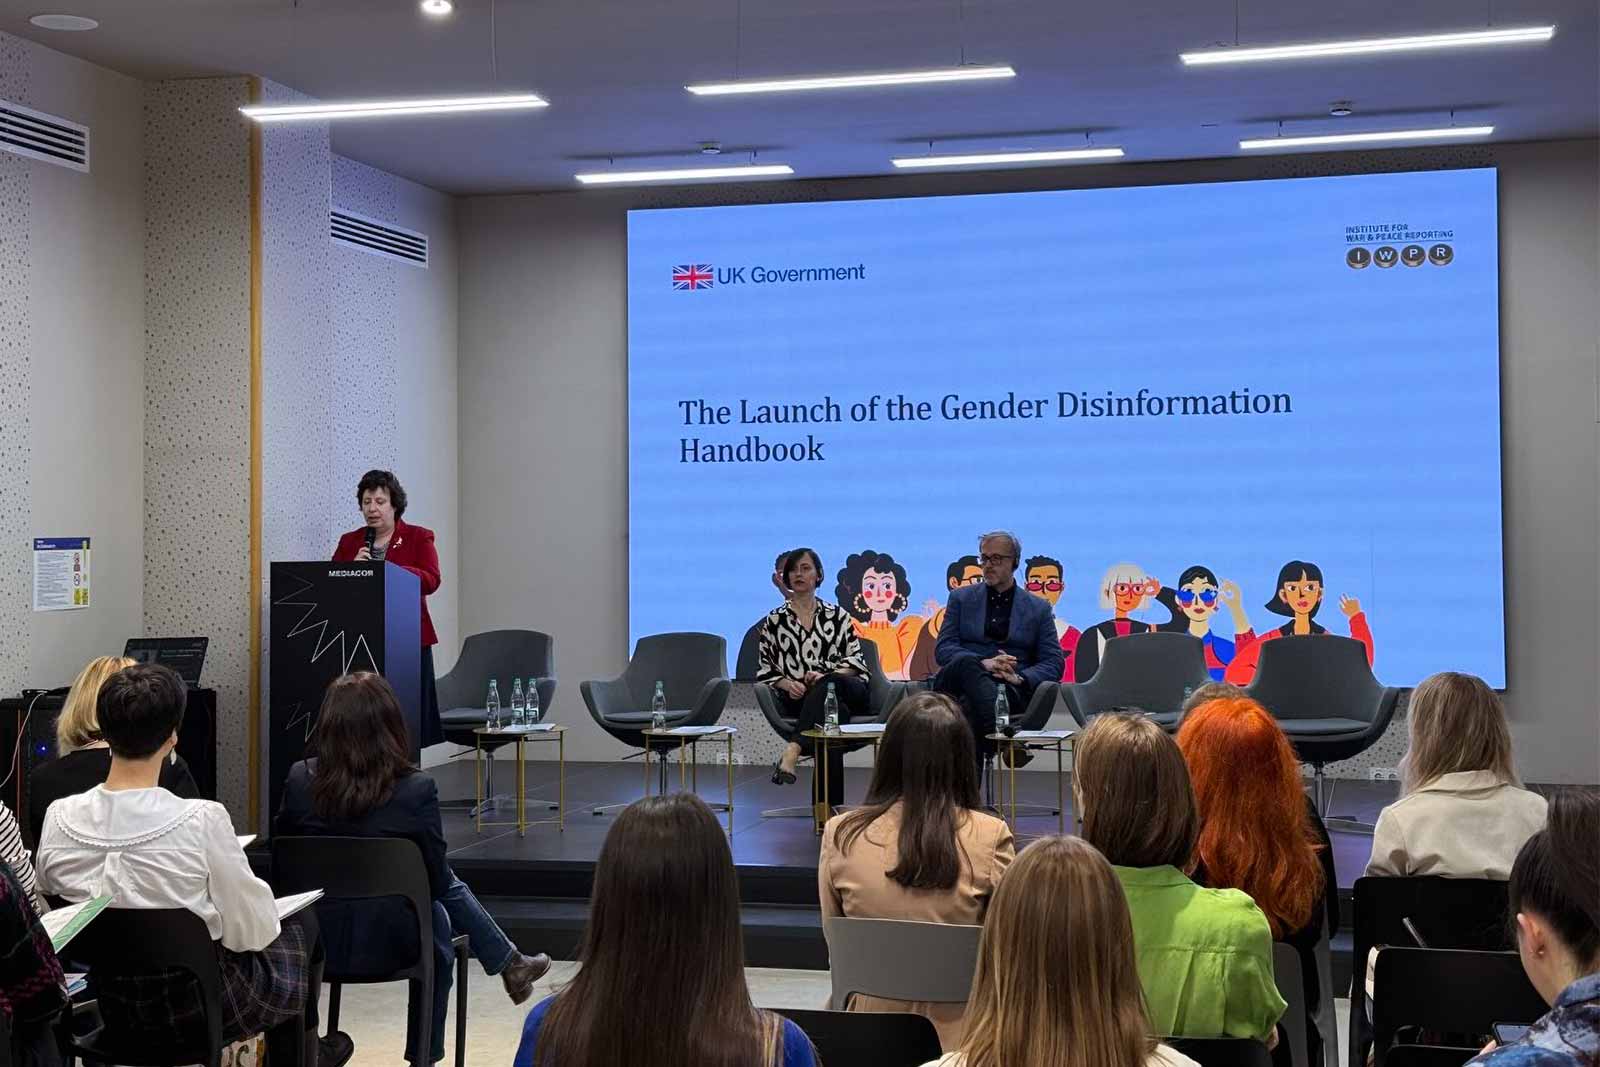 IWPR launched The Gender Disinformation Handbook in Chișinău, Moldova, with a panel discussion that gathered diplomats, government officials, activists, journalists and students to discuss the sharp increase in false and malicious narratives that deliberately target individuals on their gender and other identities. Fern Horine, British ambassador to Moldova, delivered the keynote speech during the launch of The Gender Disinformation Handbook in Chișinău on March 25. © IWPR